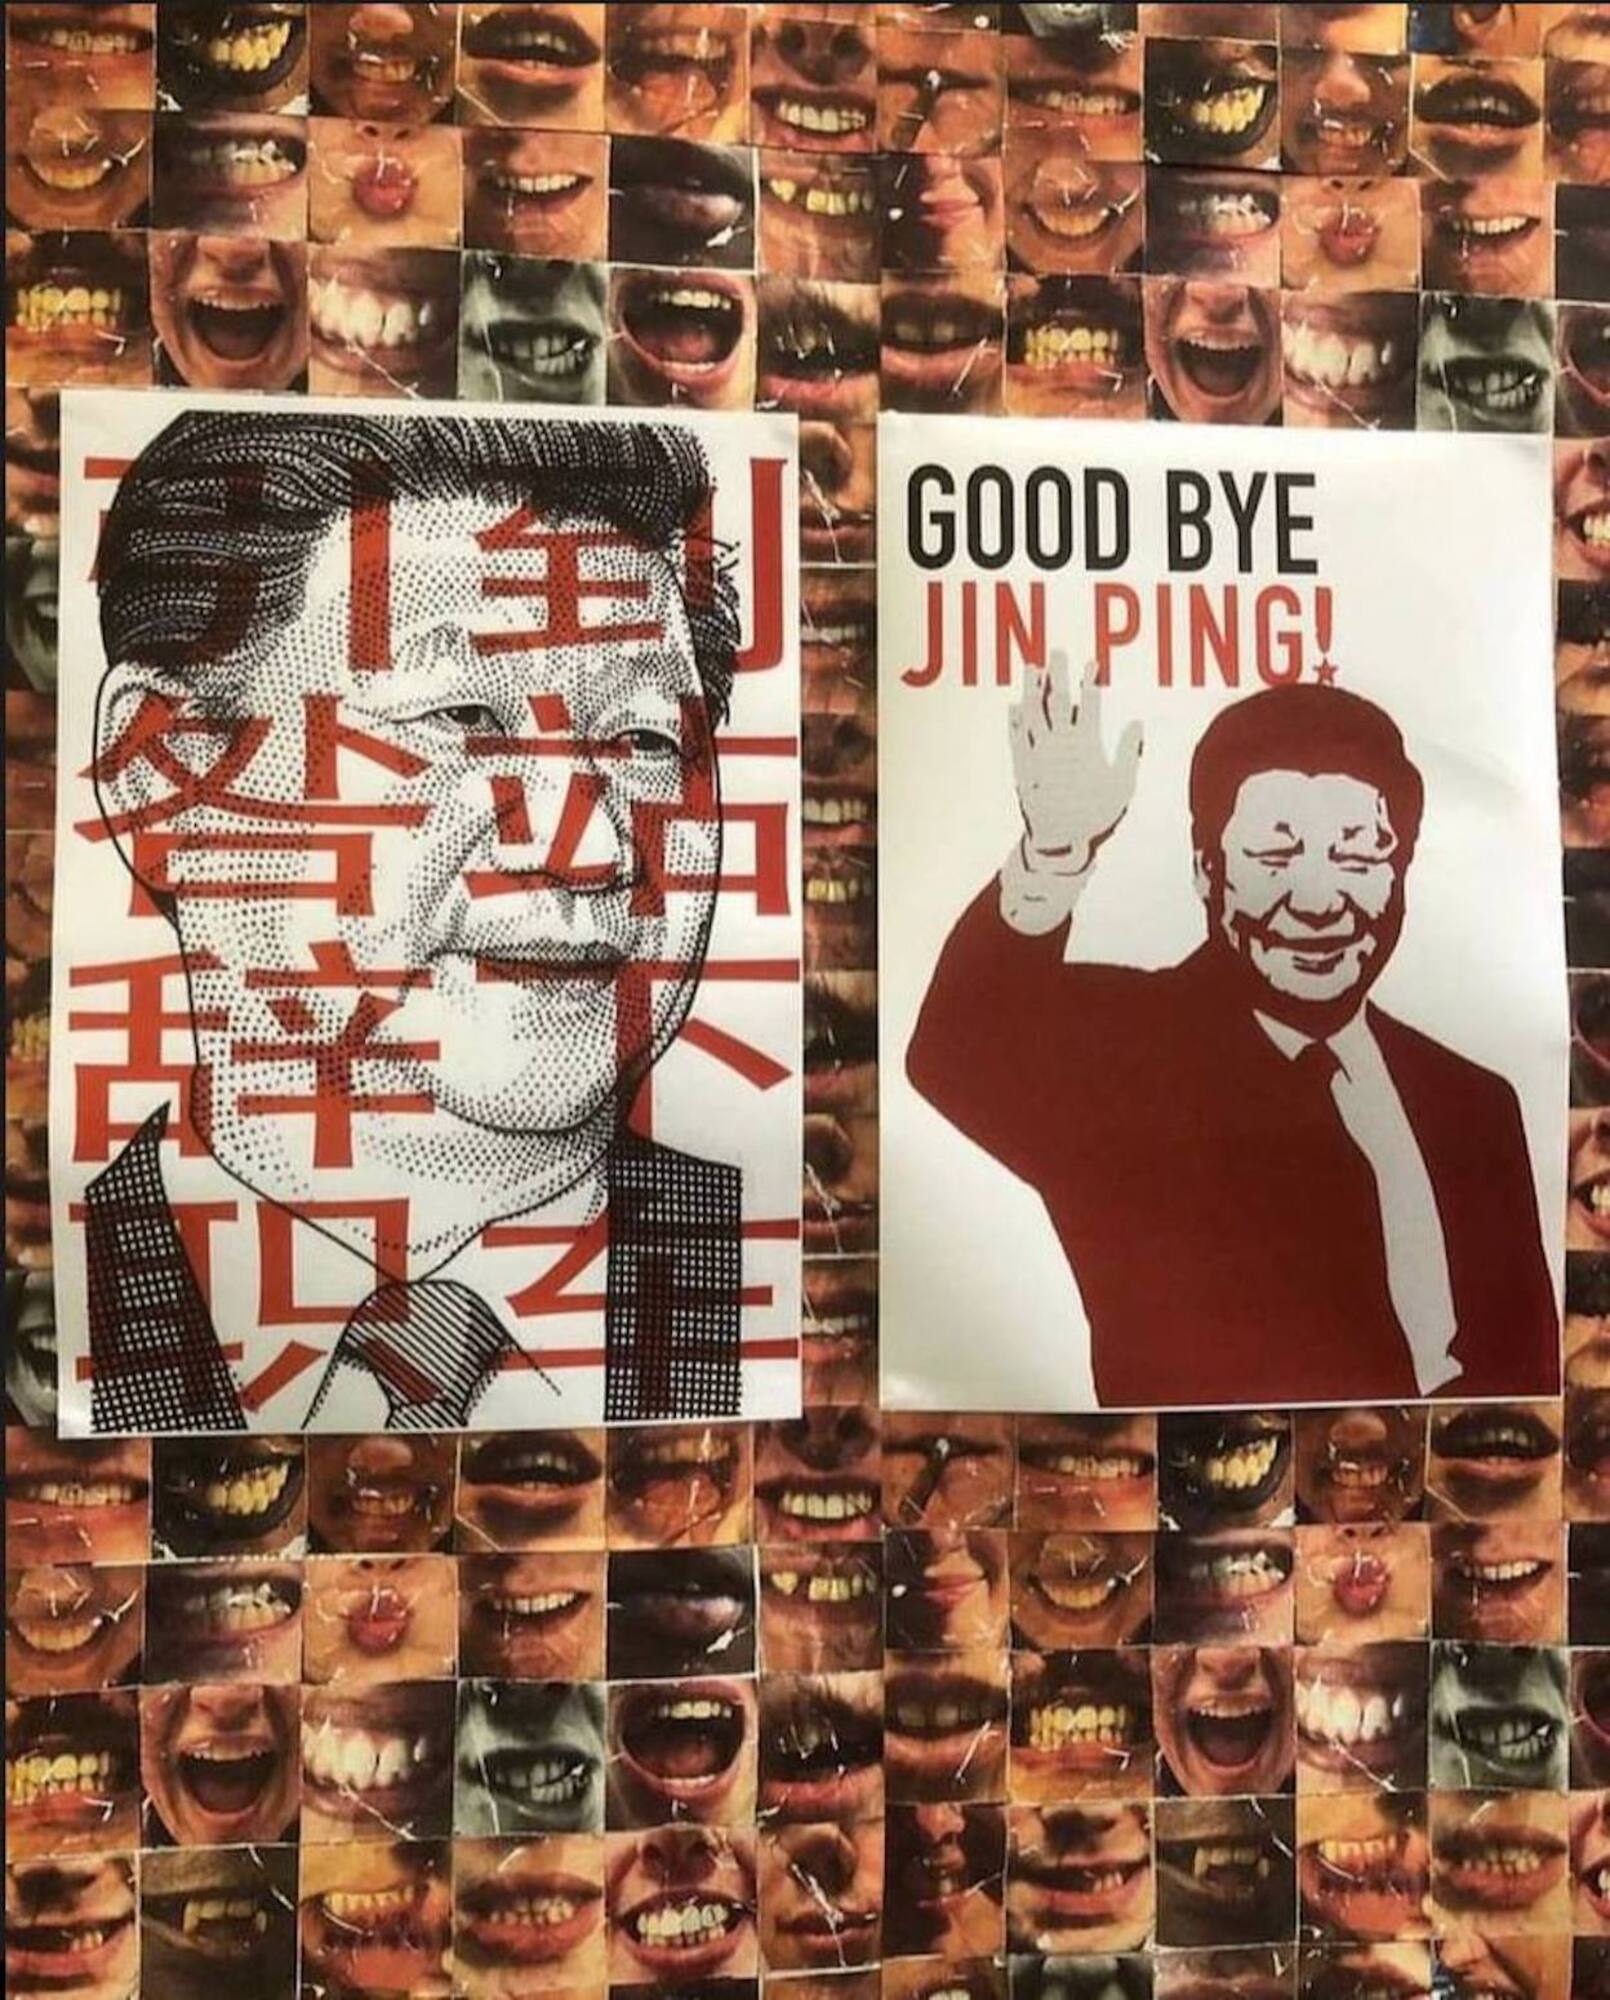 Anti-Xi Jinping Posters Are Spreading in China via AirDrop